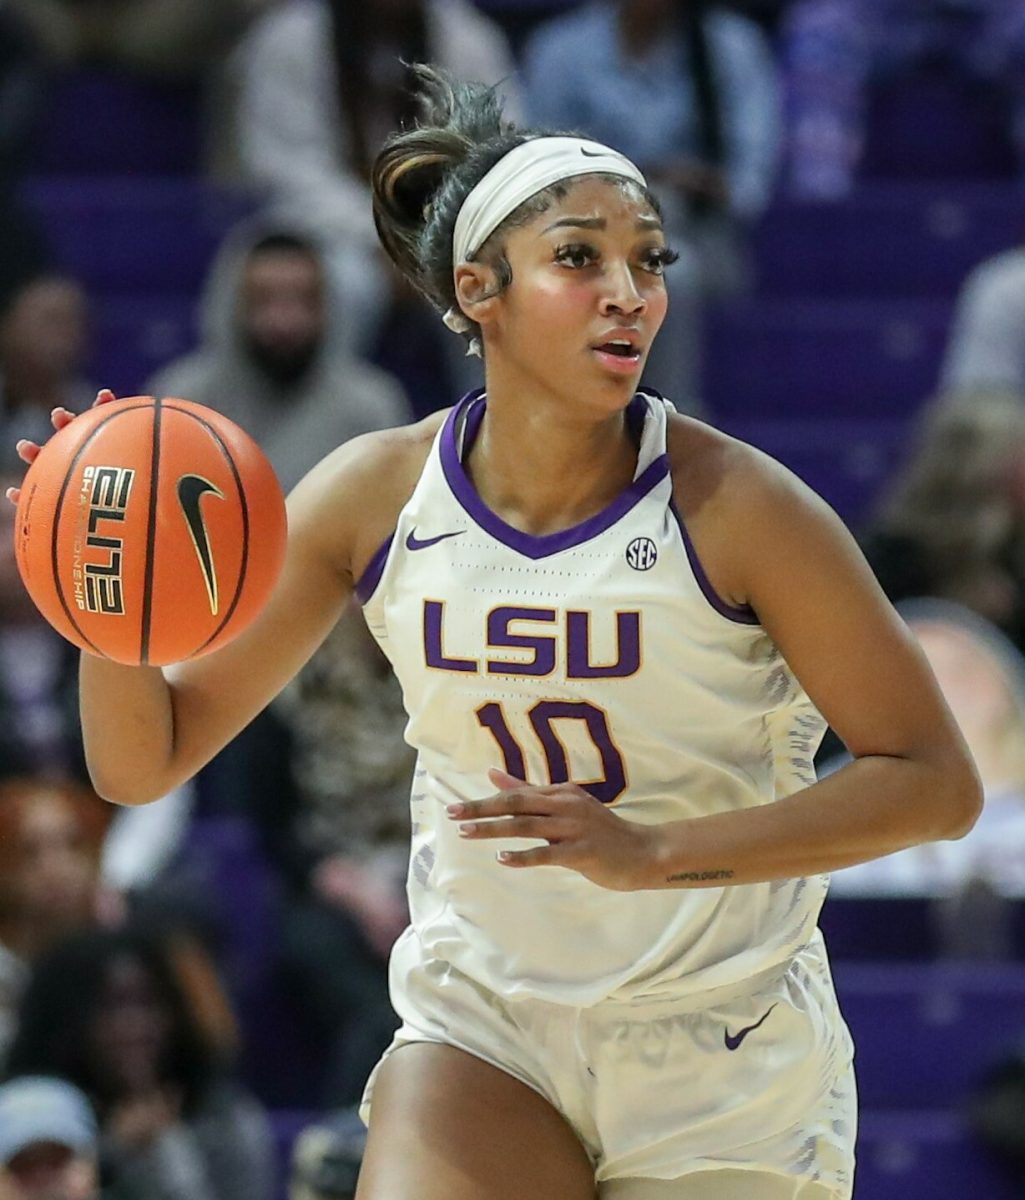 Angel Reese, drafted in the first round of the 2024 WNBA draft by the Chicago Sky, in a collegiate game for LSU. Reese is one of the biggest names in the sport and deserves a larger contract, much like Clark and Cardoso.